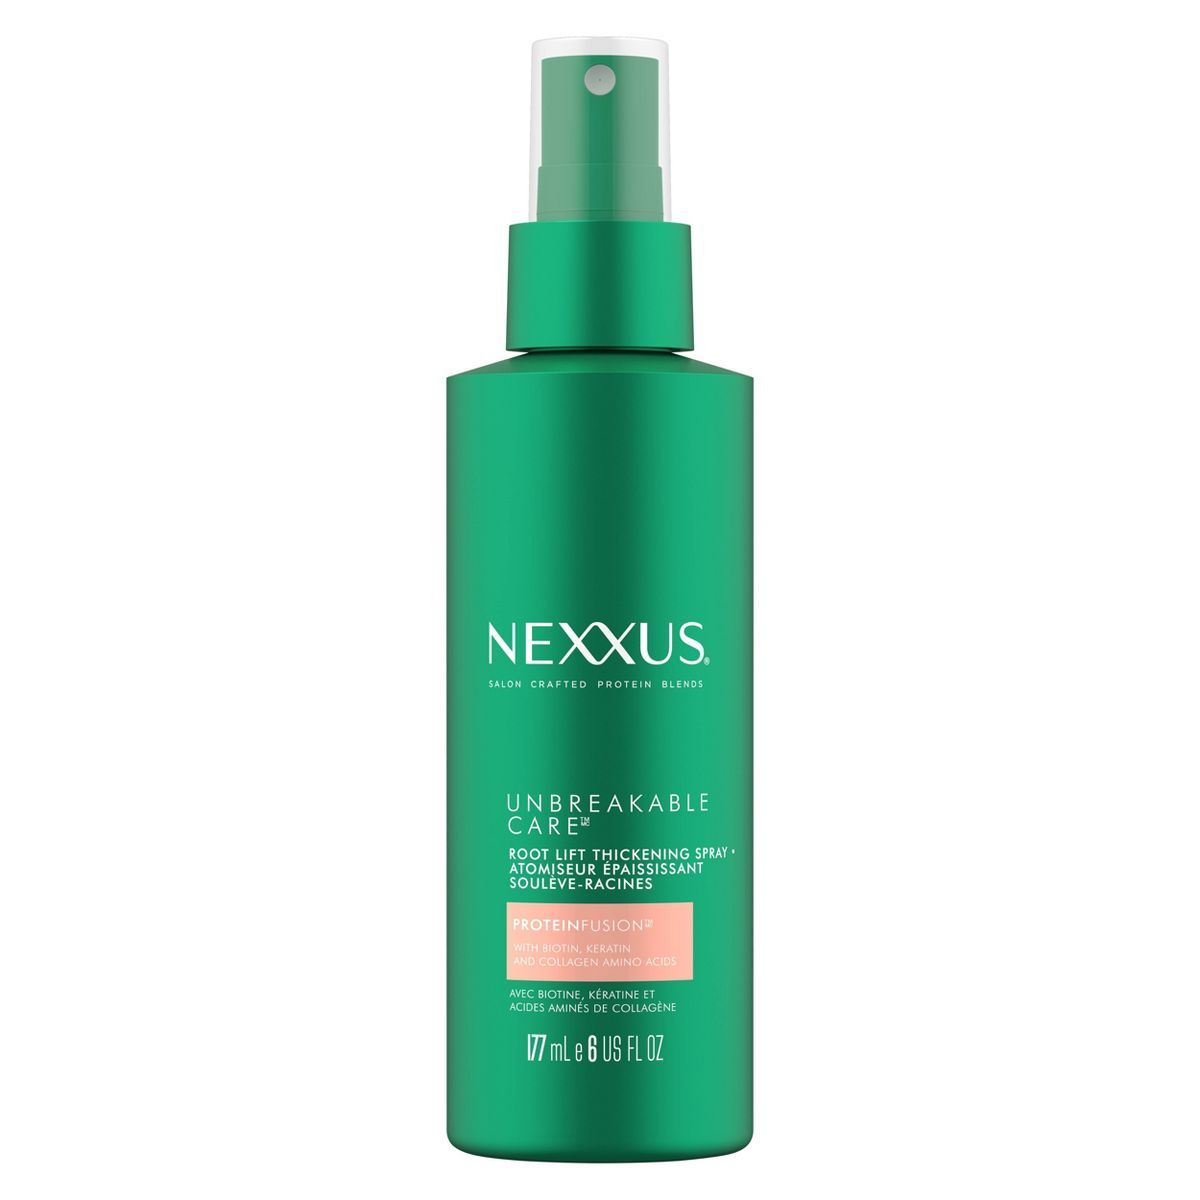 Nexxus Unbreakable Care for Fine & Thin Hair Root Lift Thickening Spray - 6 fl oz | Target